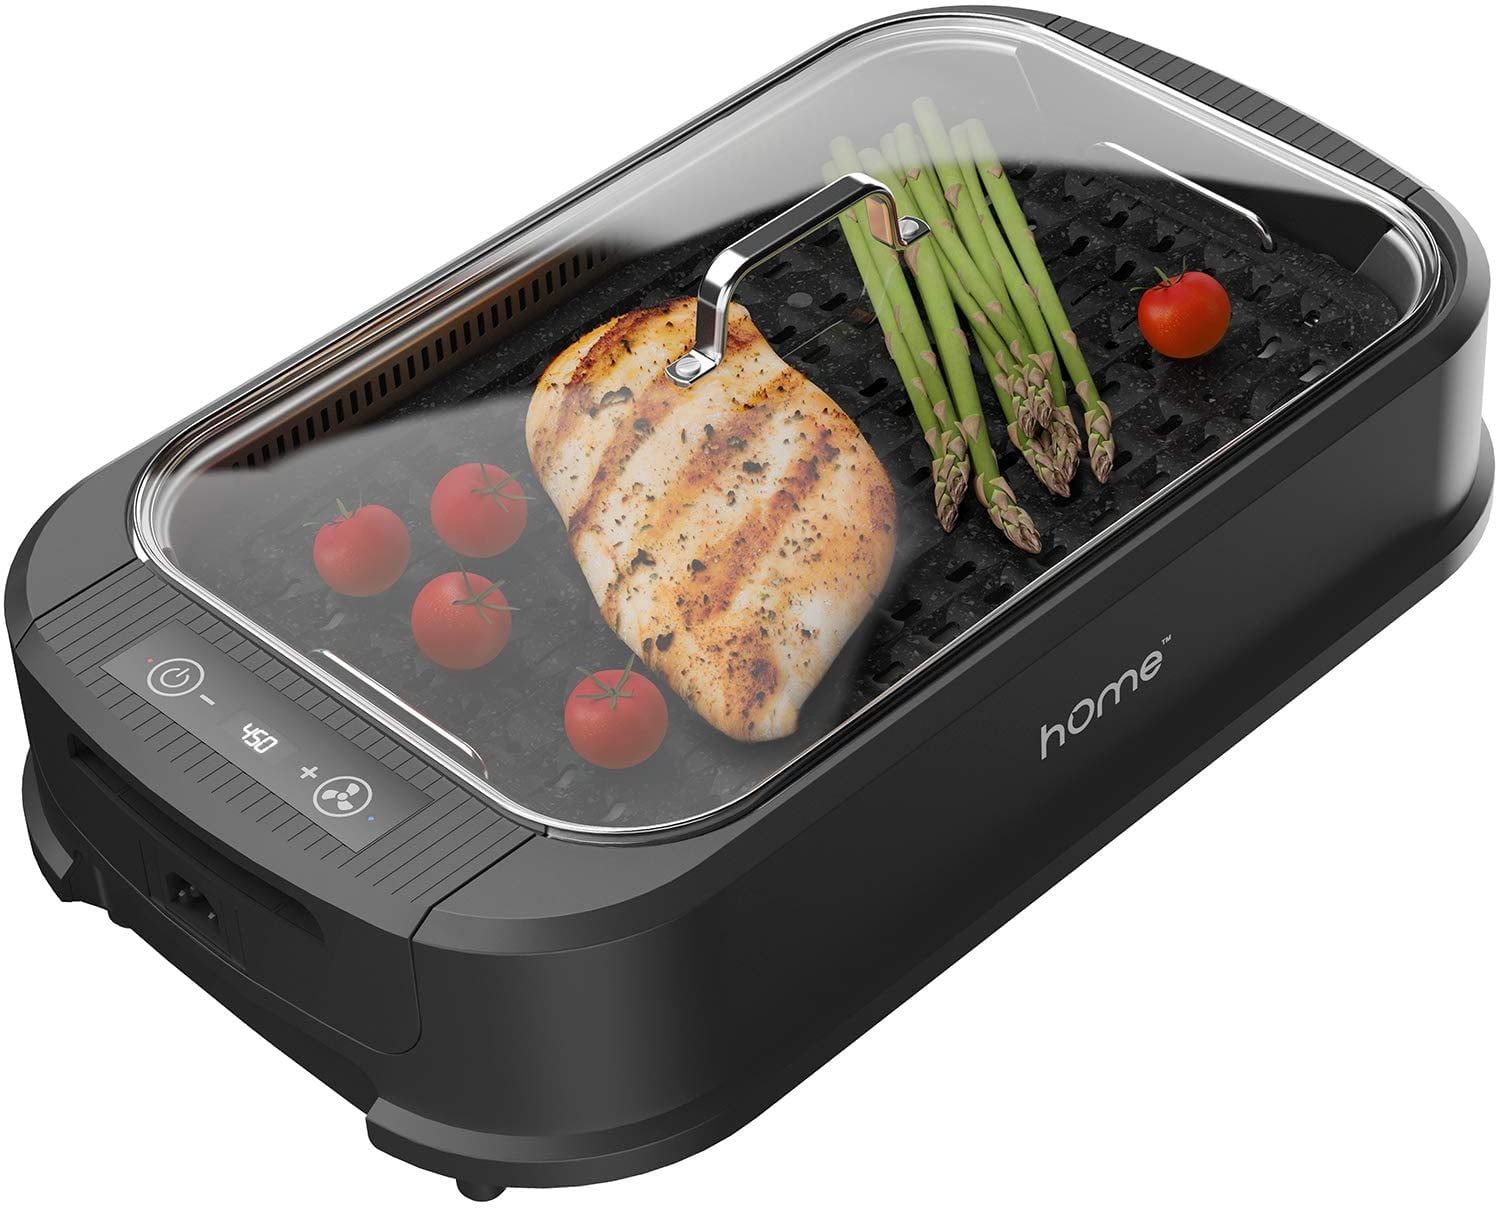 Details about   Electric Indoor Grill Smokeless Stainless Steel Portable BBQ Countertop Cooking 